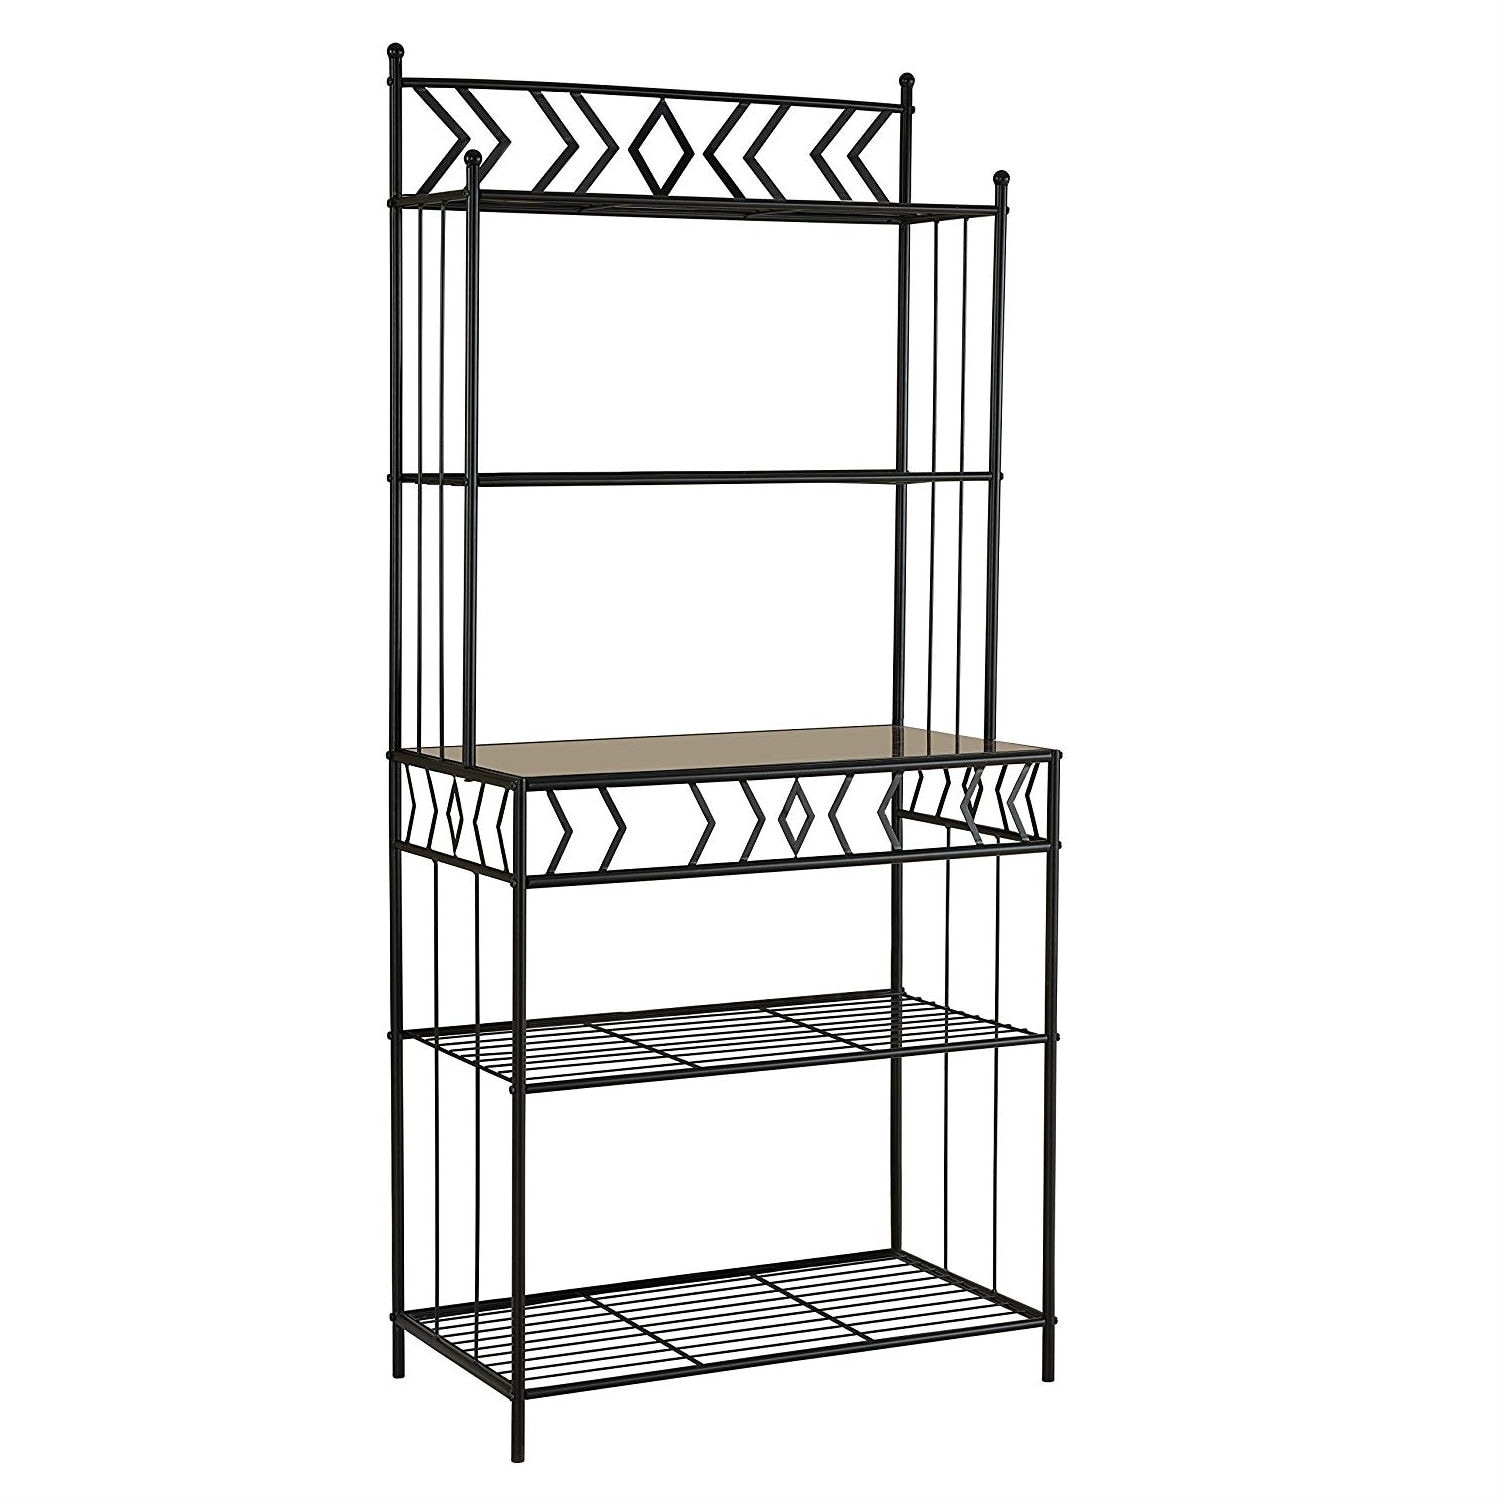 https://ak1.ostkcdn.com/images/products/is/images/direct/c3421c83a7407a4fd45dacde8f01206c1639560d/Kitchen-Bakers-Rack-in-Black-Metal-with-Marble-Finish-Top.jpg